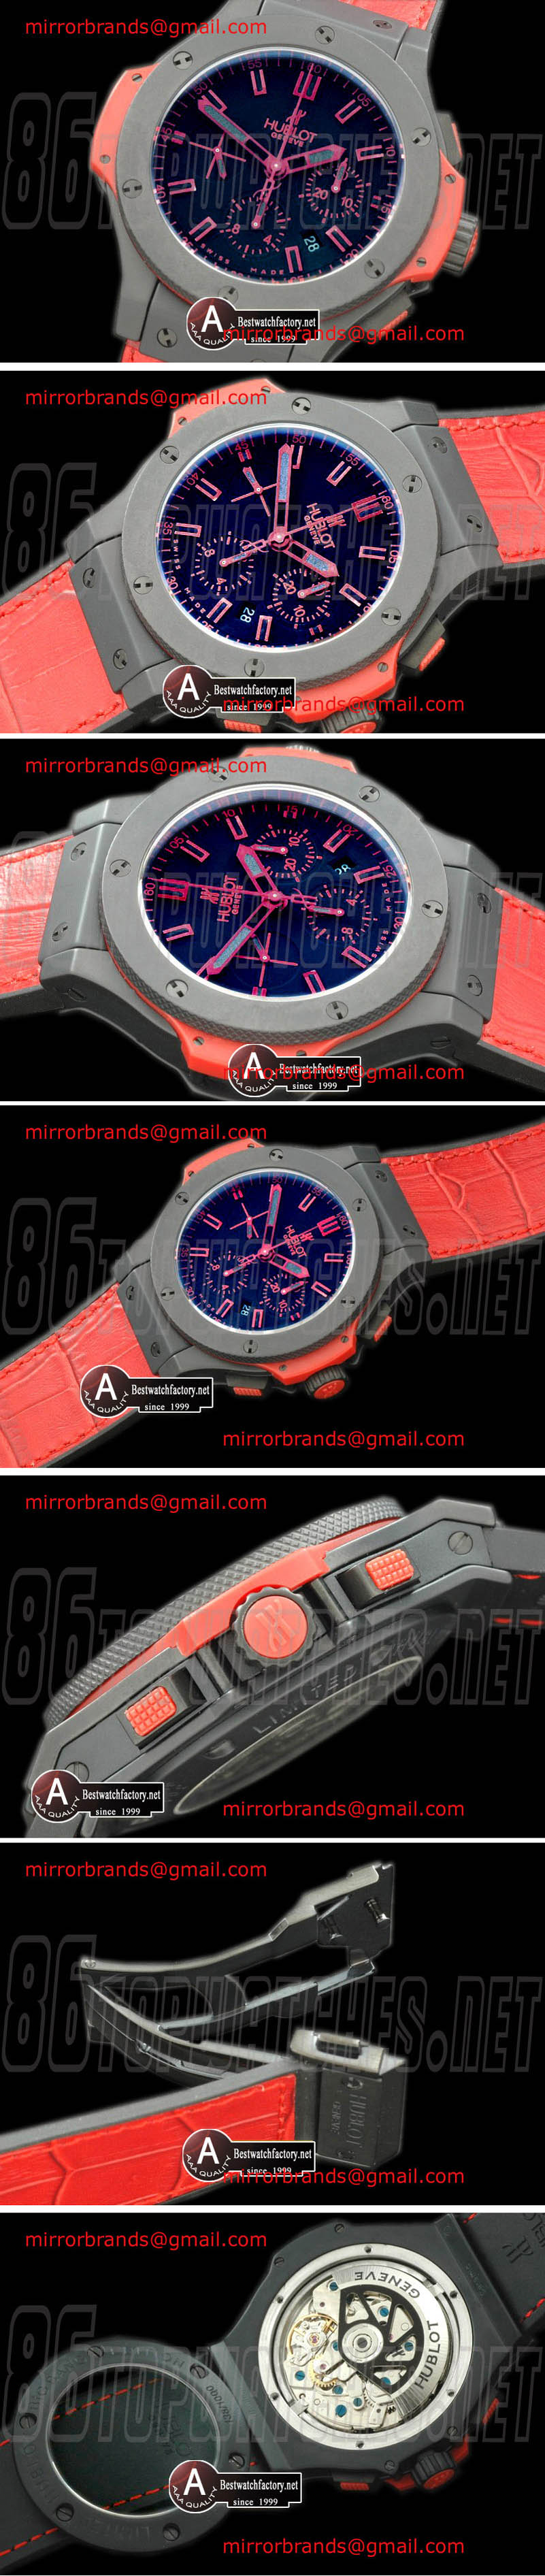 Luxury Hublot Big Bang "All Black Red" Special Edition 301.CI.1130.GR.ABR10 Ceramic/Leather A-7750